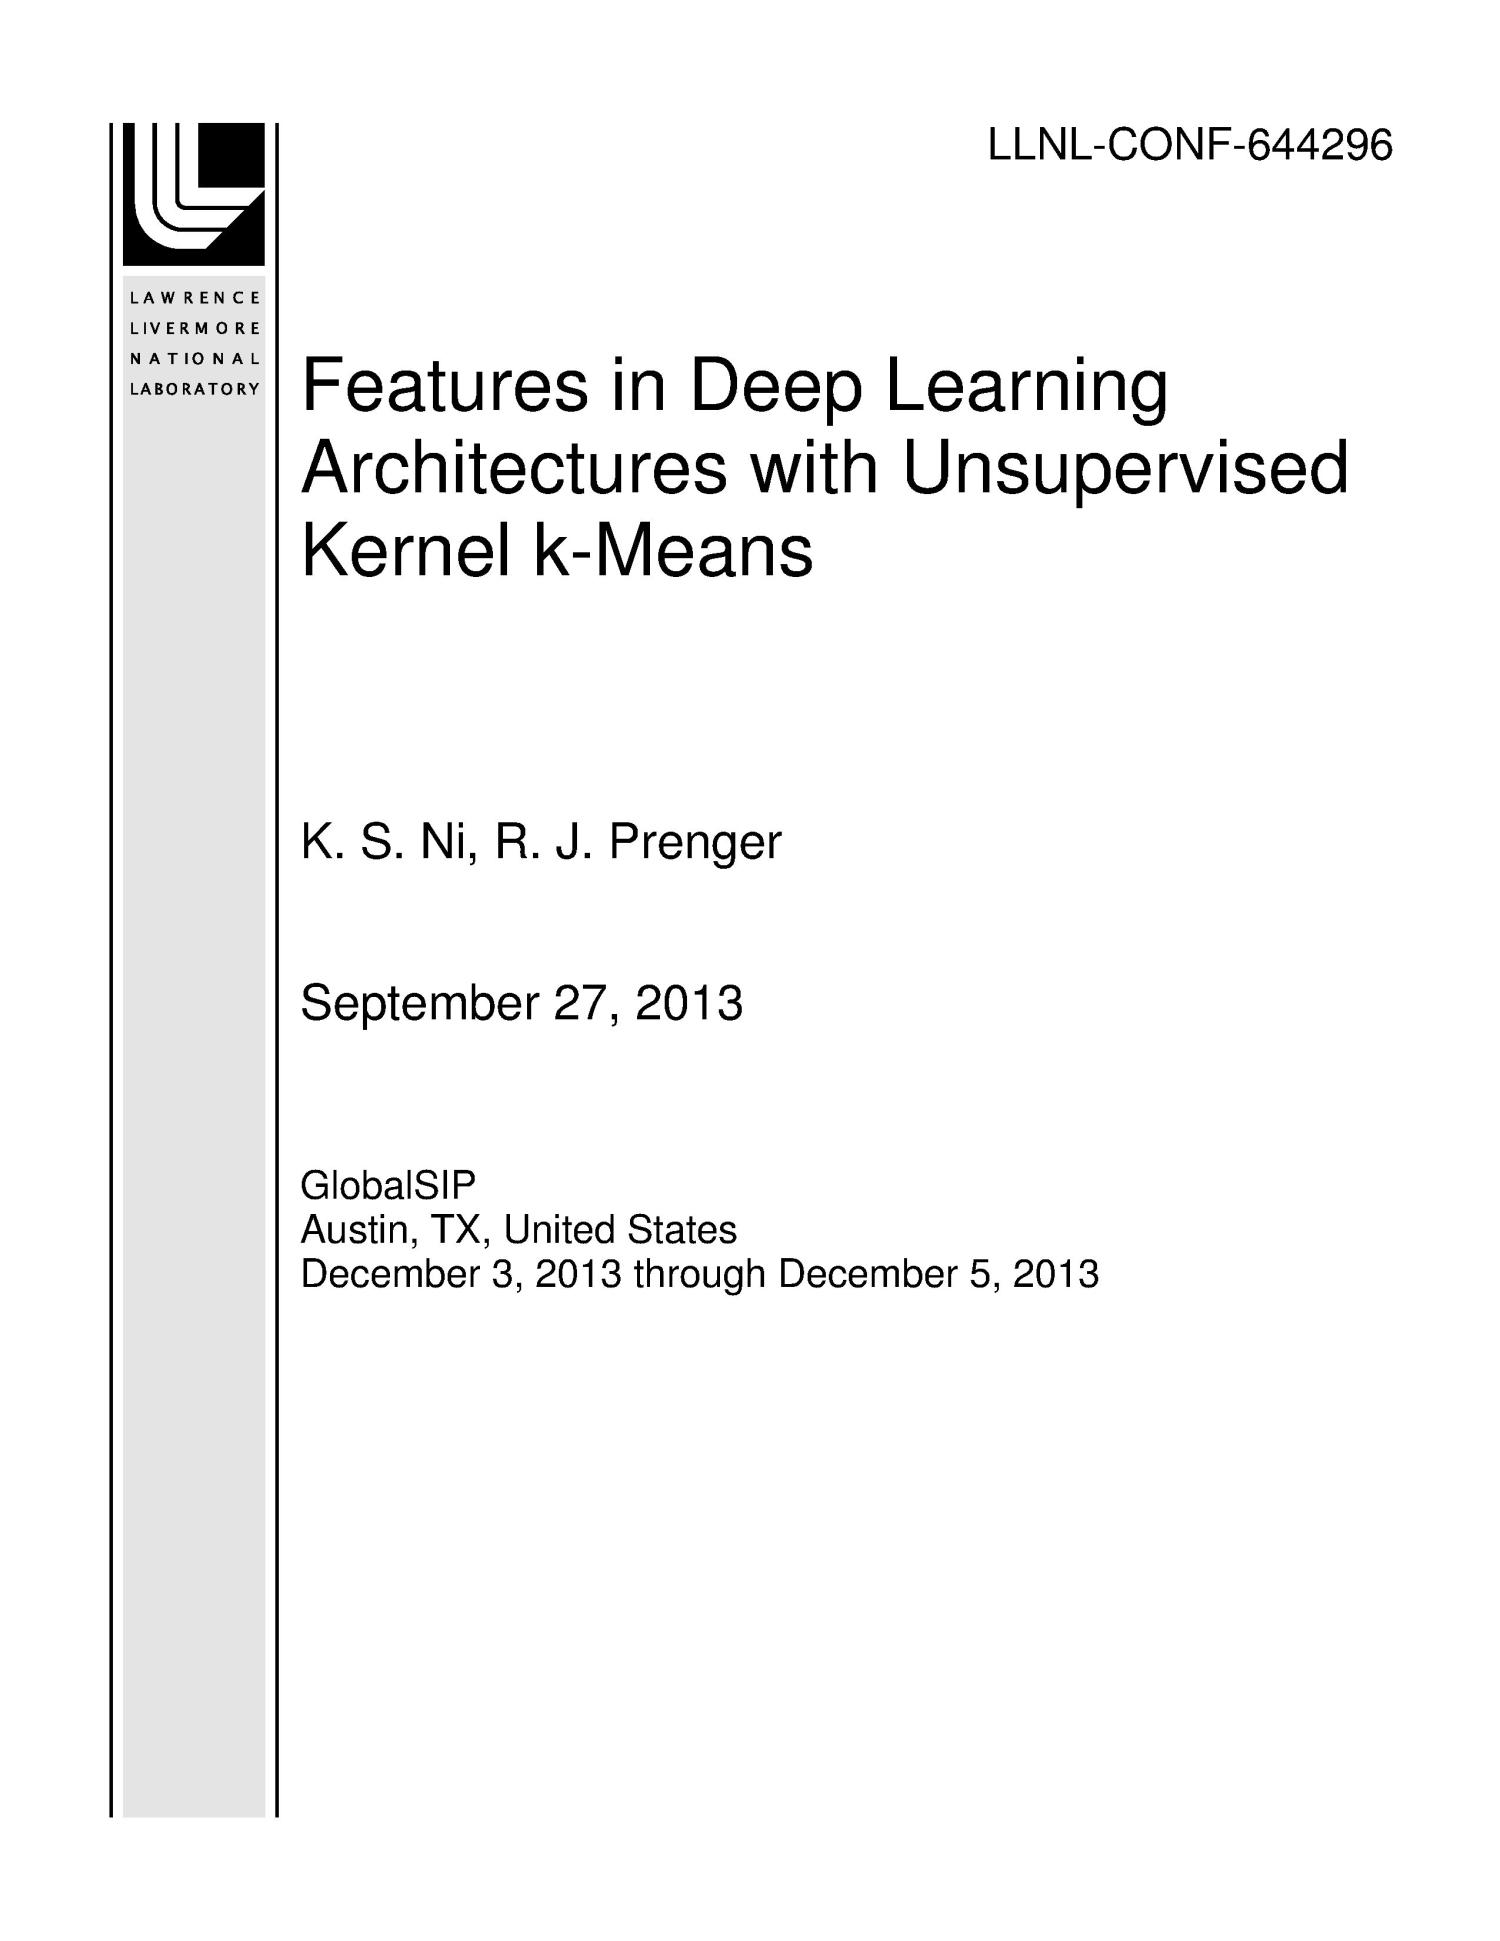 Features in Deep Learning Architectures with Unsupervised Kernel k-Means
                                                
                                                    [Sequence #]: 1 of 6
                                                